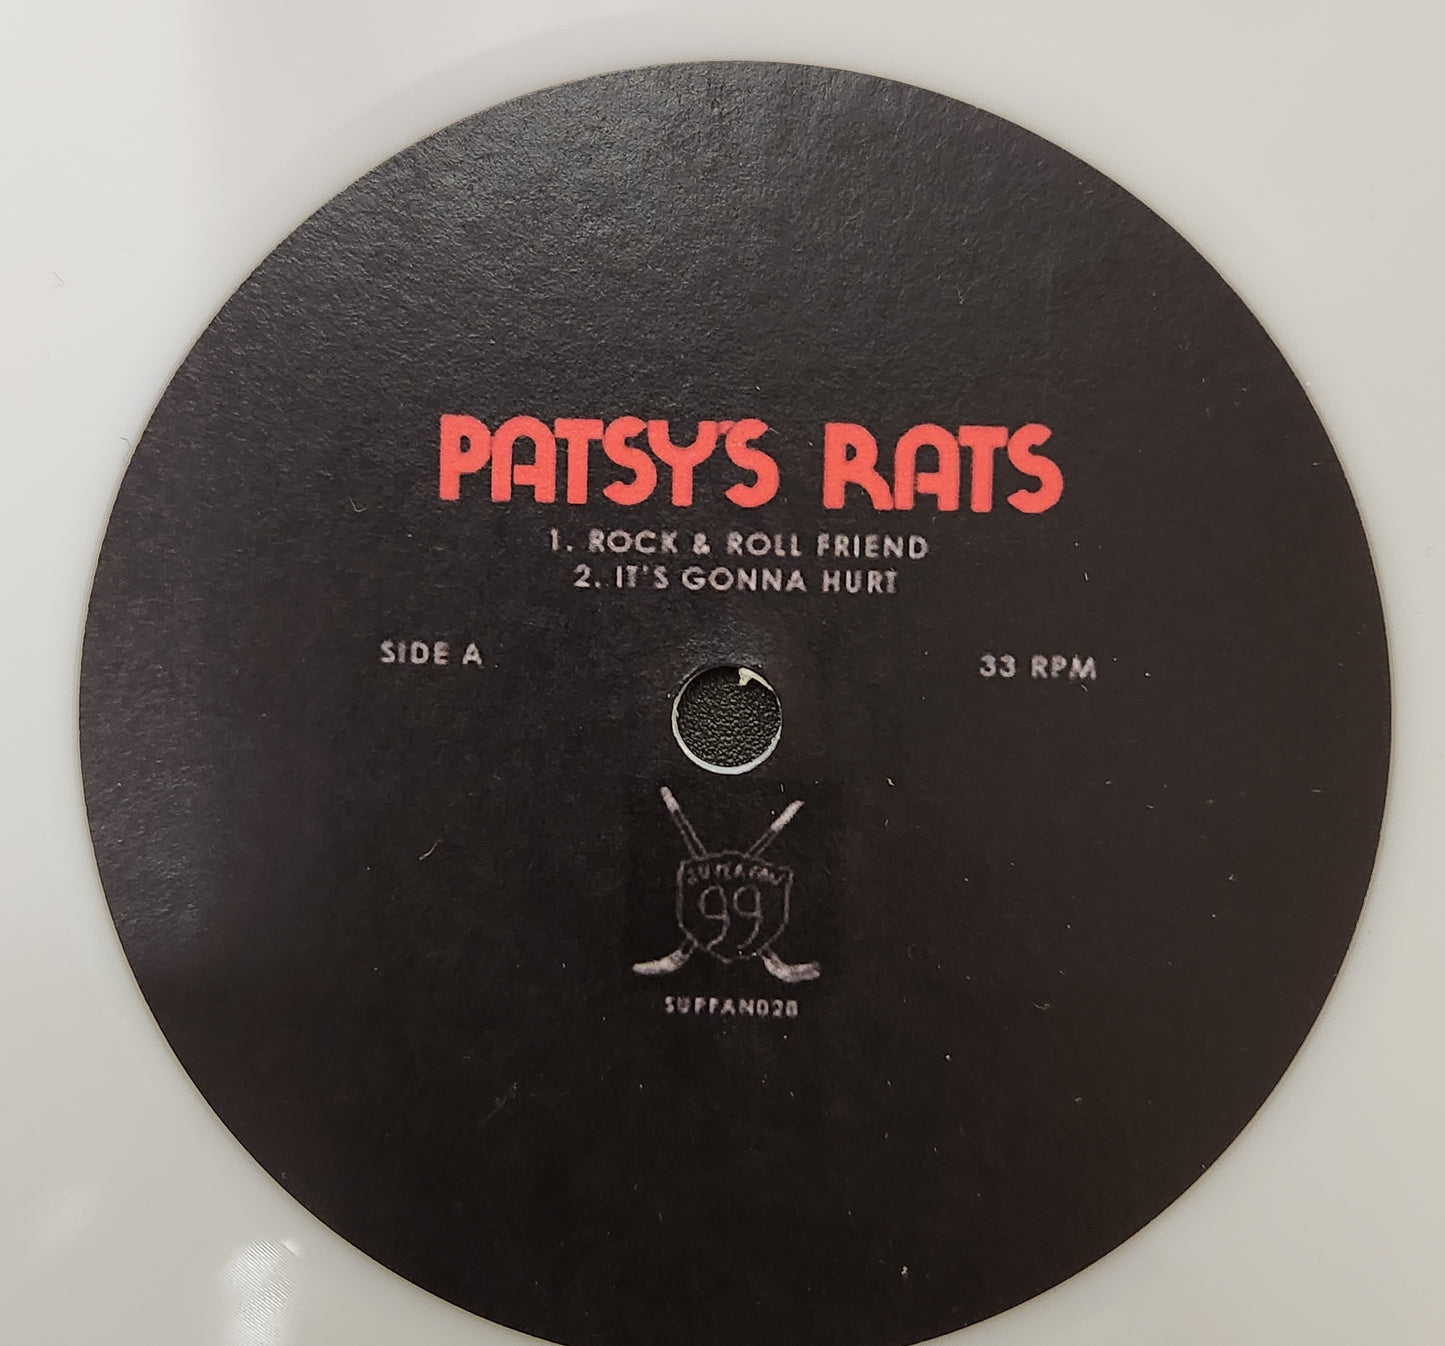 Obscure Patsy's Rats 2016 Self-Titled 8" Square White Lathe-Cut Indie Alt Rock EP Record